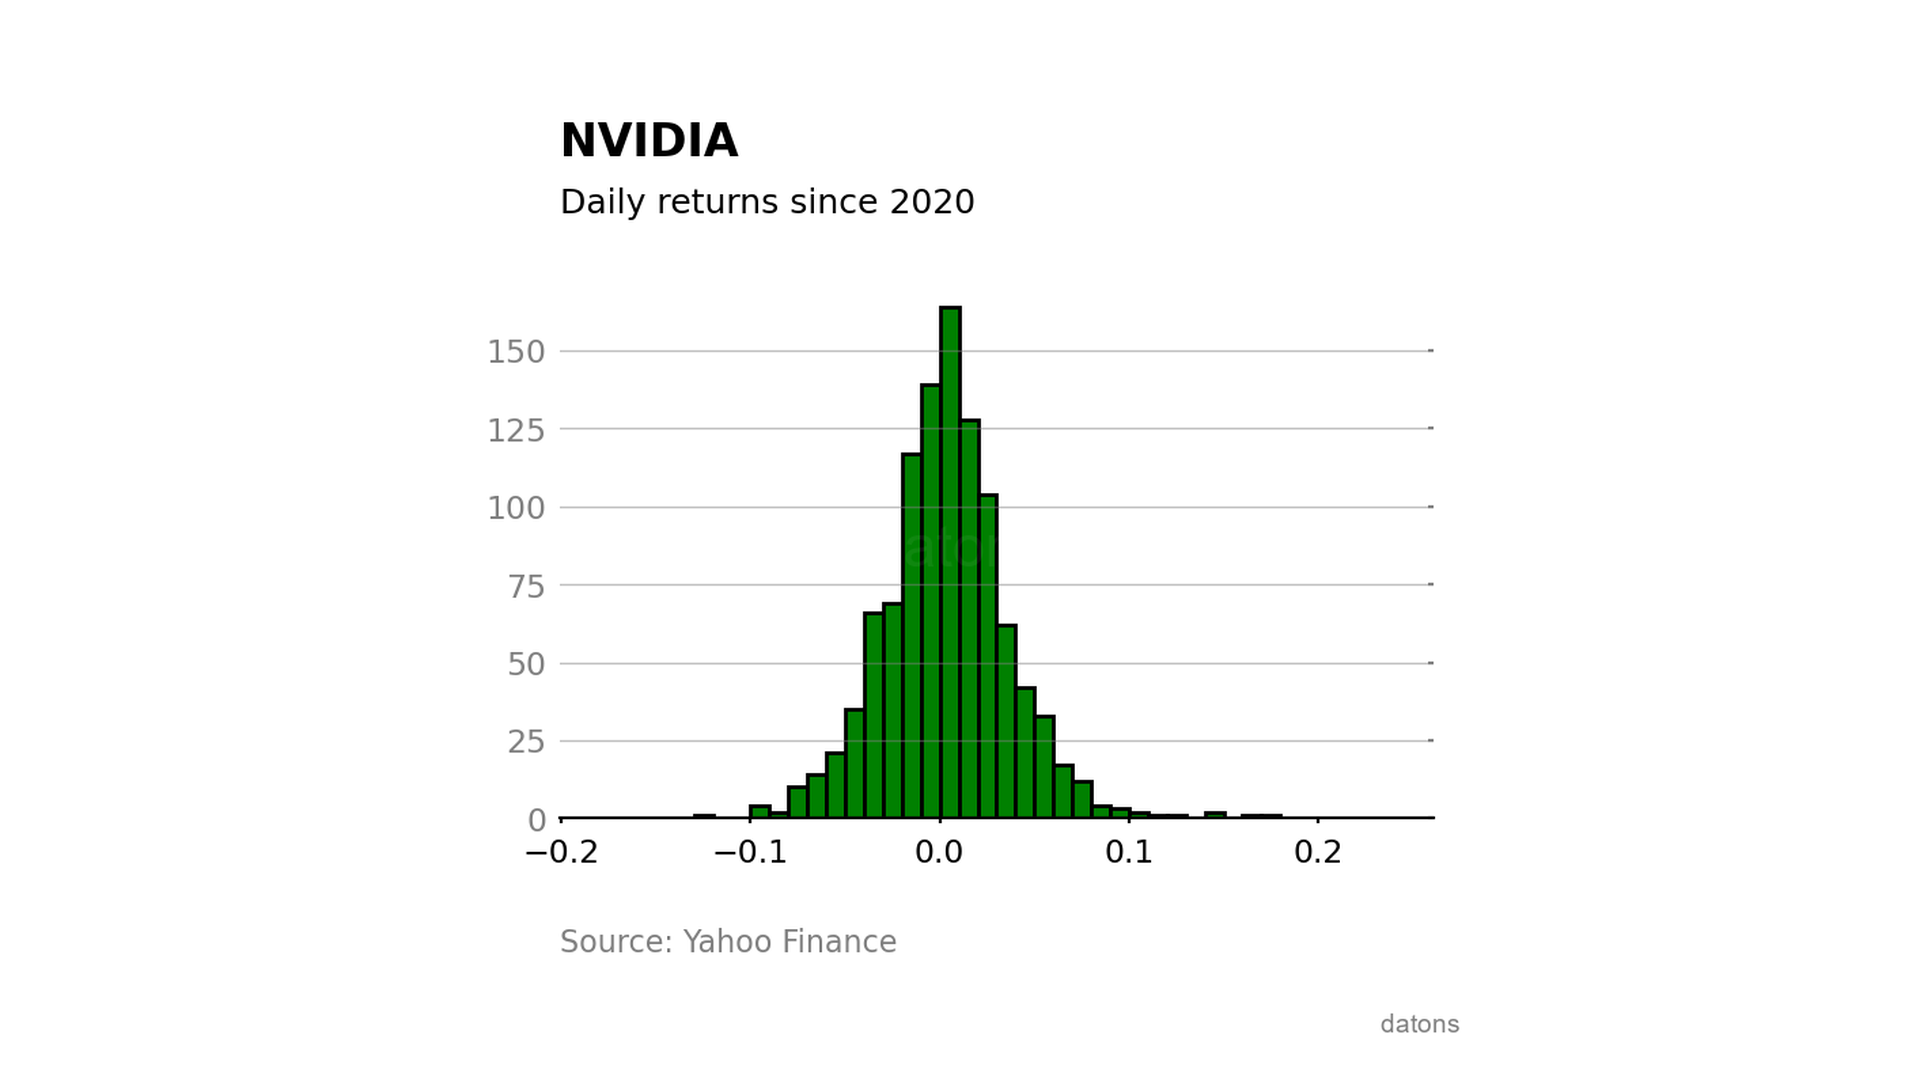 Daily return histogram of NVIDIA shares, showing a distribution that includes a peak of more than 20% increase in a single day.